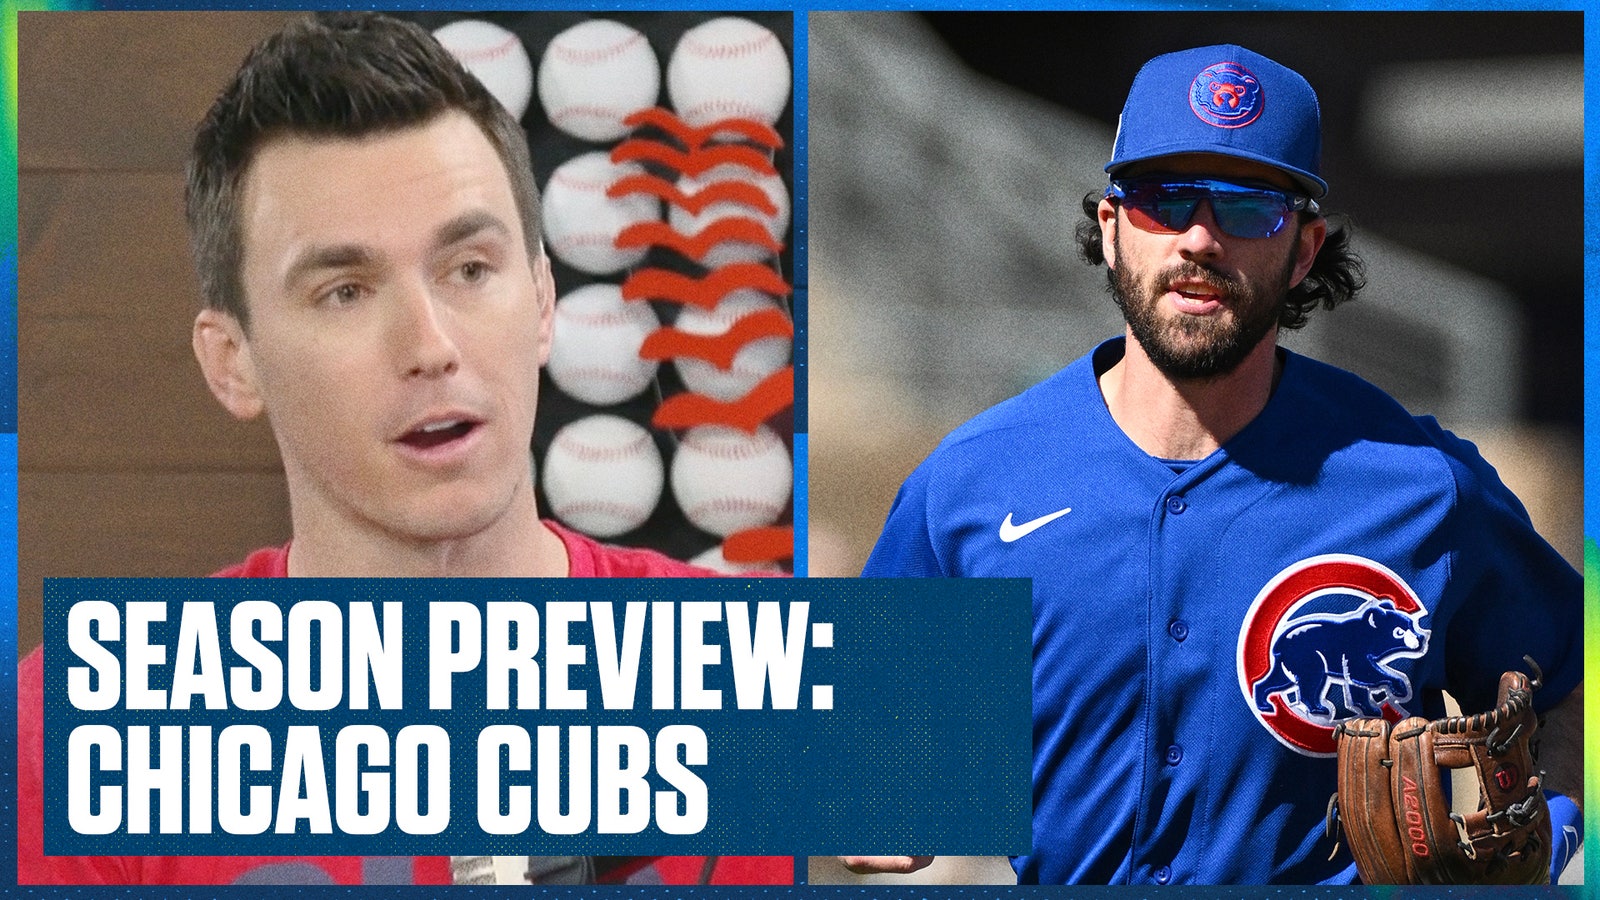 Cubs Season Preview: Can the new-look Cubs take the next step this year?